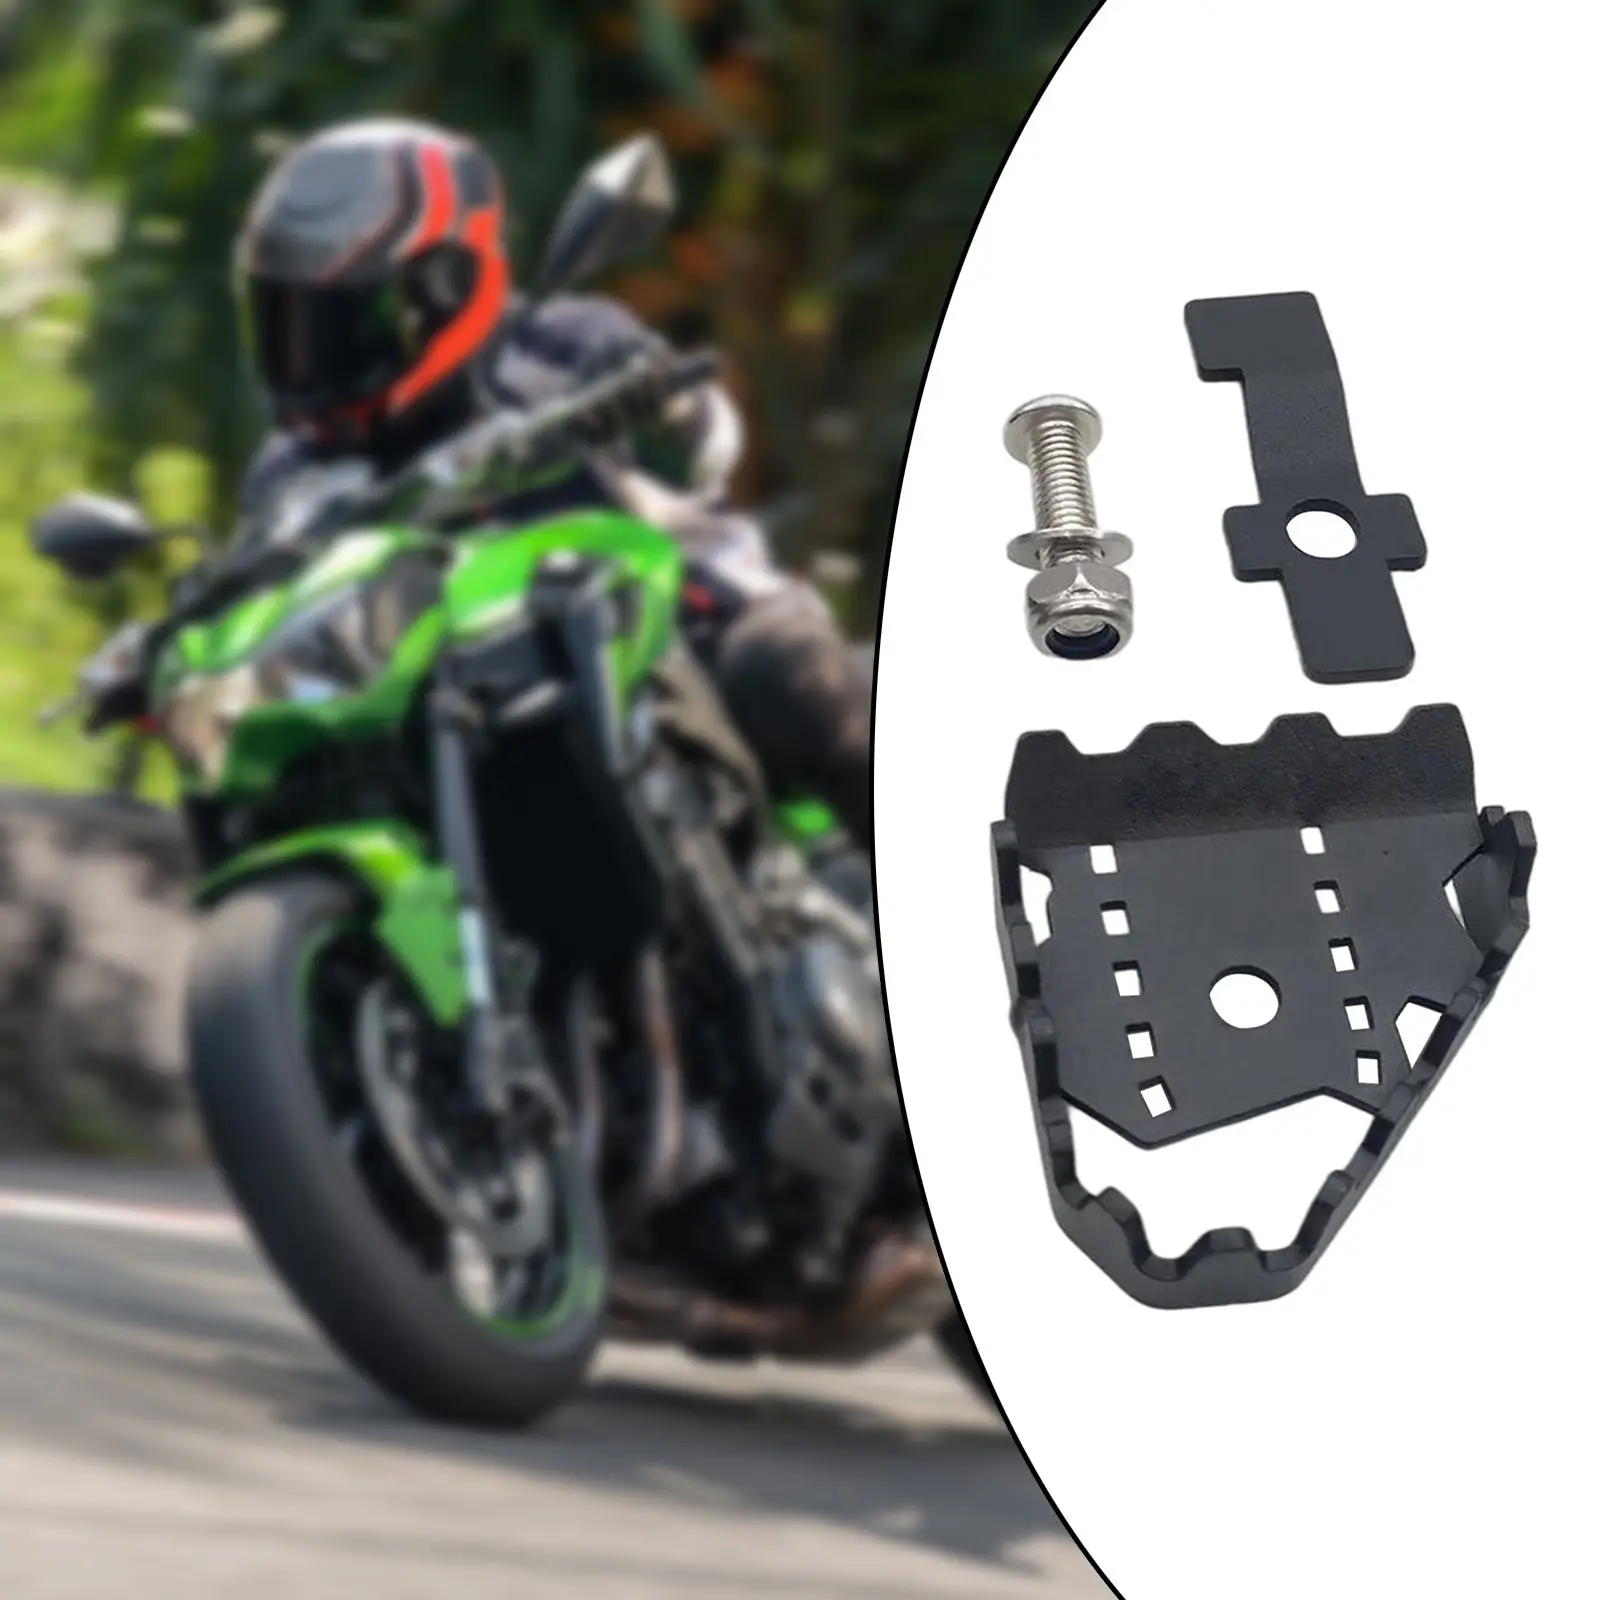 Brake Pedal Extension Step Tip Plate Good Replacement for YAMAHA TENERE700 XTZ700 2019-2021, Accessories Interchange